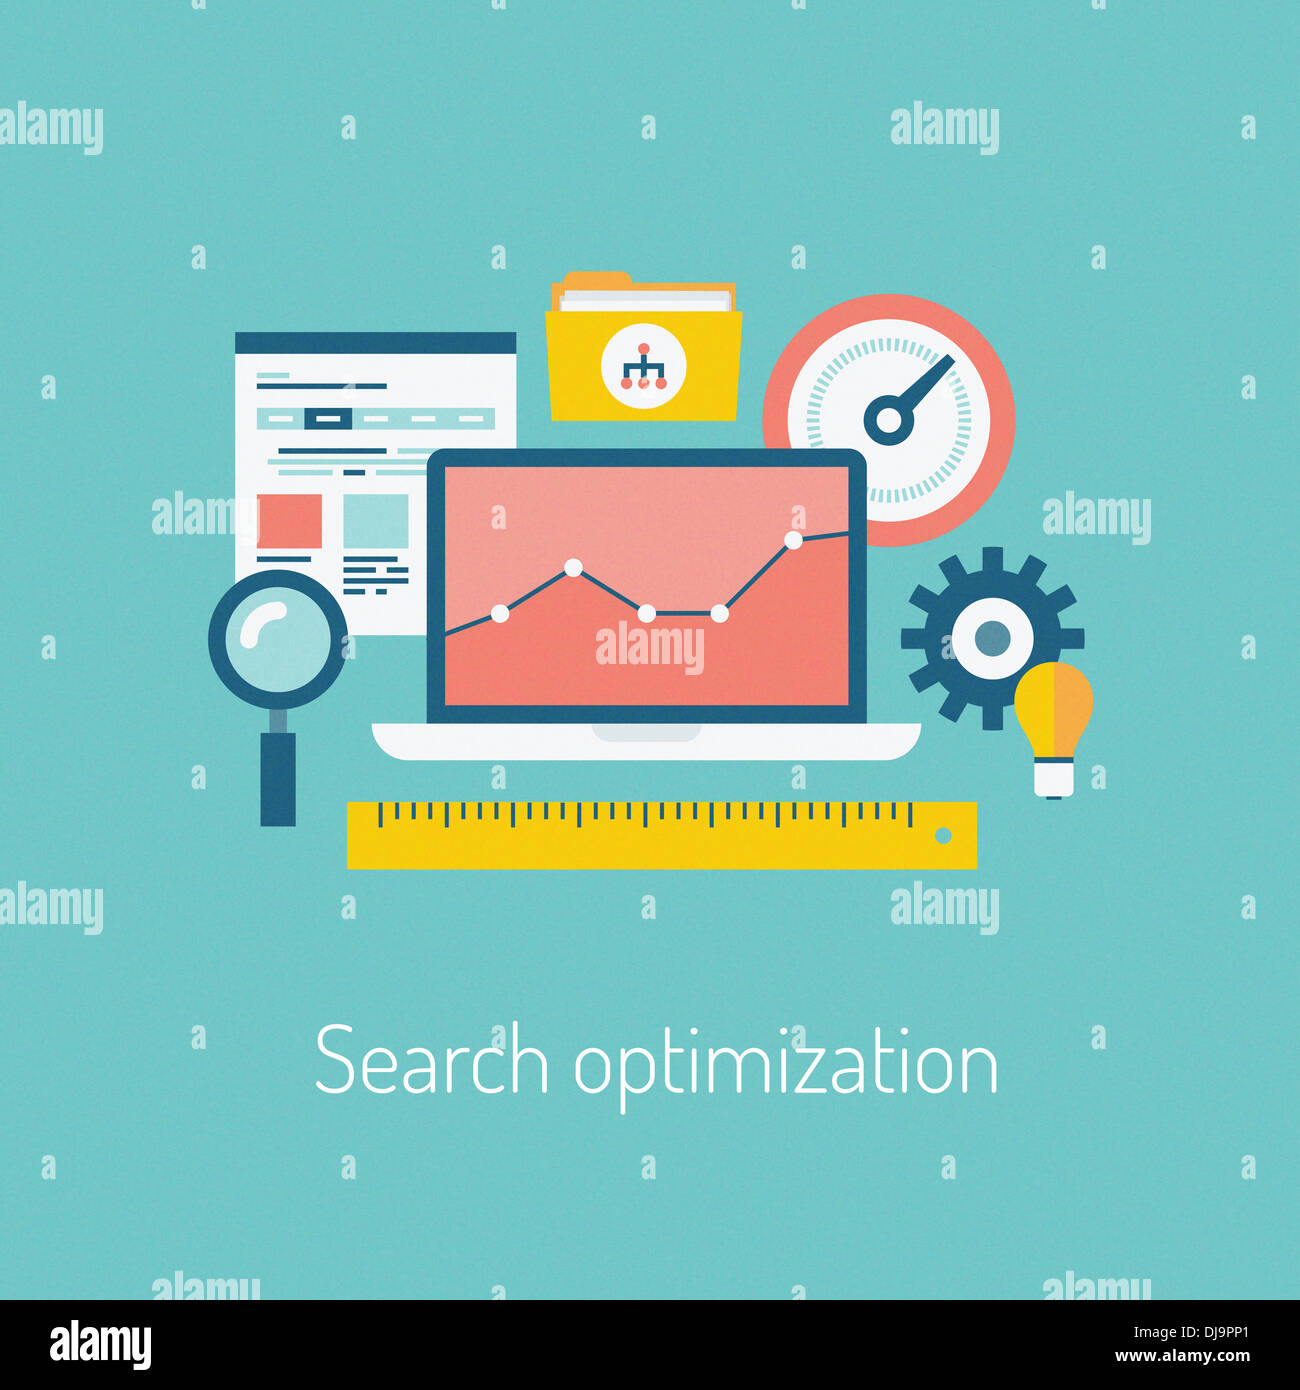 Flat design modern illustration of the SEO website searching optimization process with web page, laptop and other icons Stock Photo